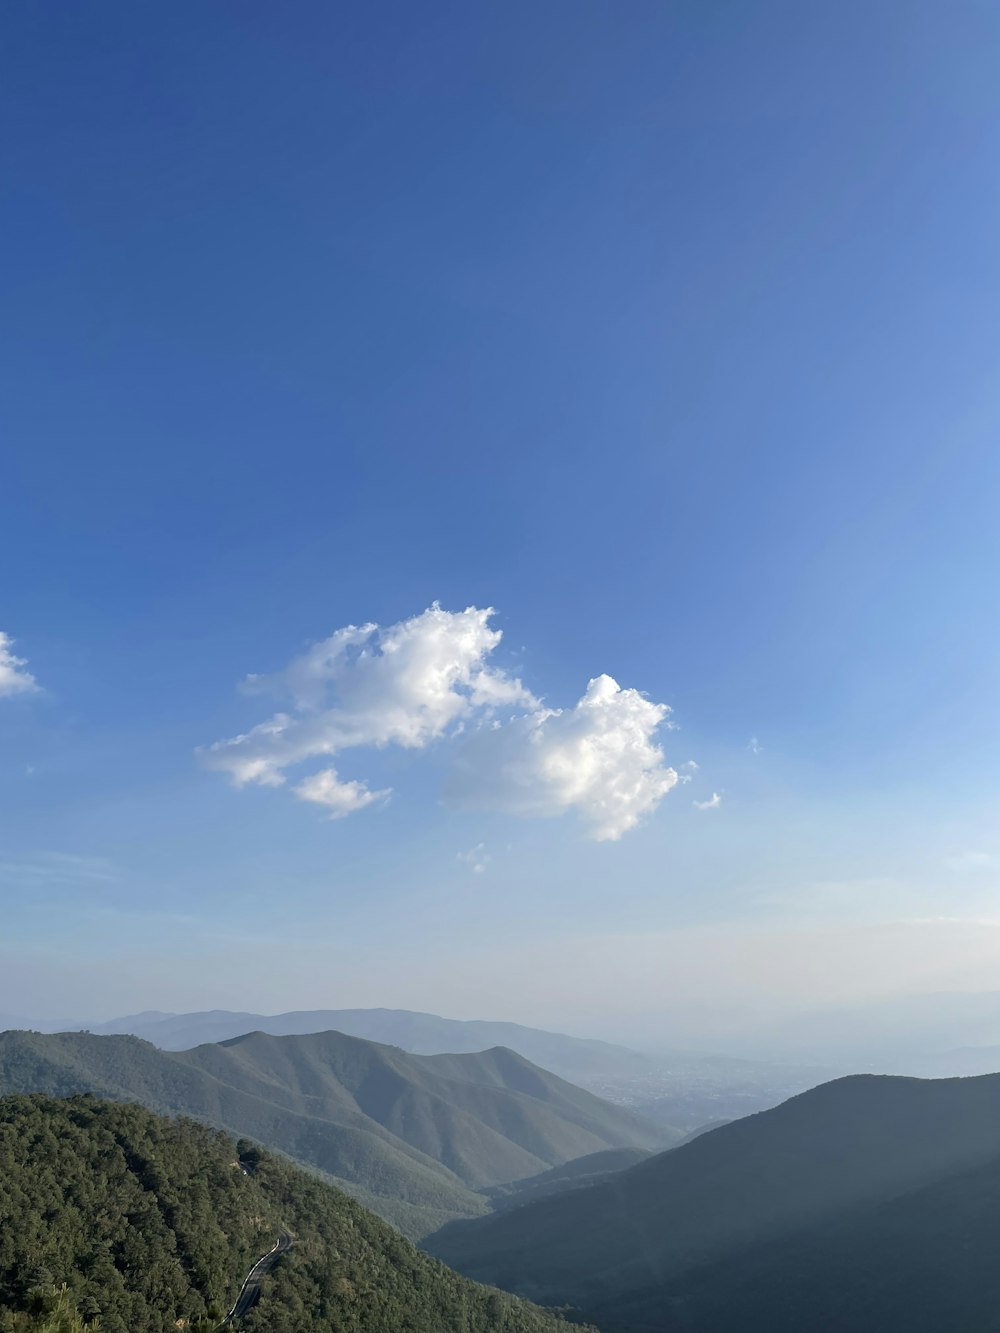 a view of a mountain range with a blue sky